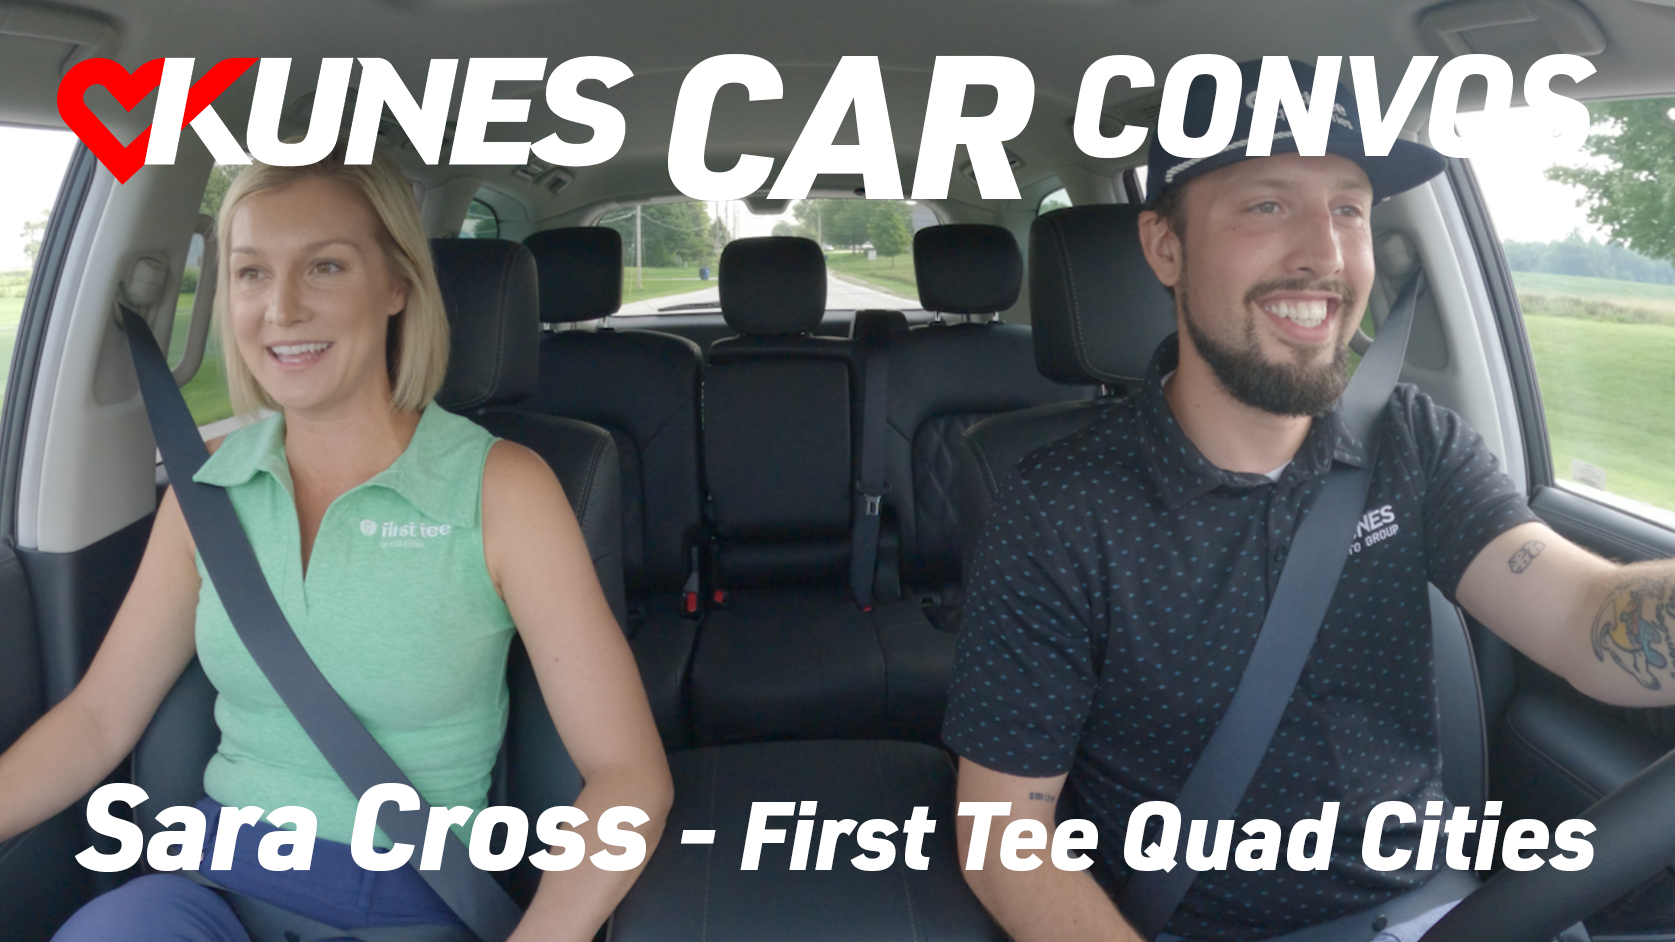 Sara Cross, Executive Director of First Tee Quad Cities, and Tony Tucker, Sales Professional at Kunes Nissan of Davenport, riding in a 2023 Nissan Armada; Text reads: Kunes Car Convos Sara Cross - First Tee Quad Cities